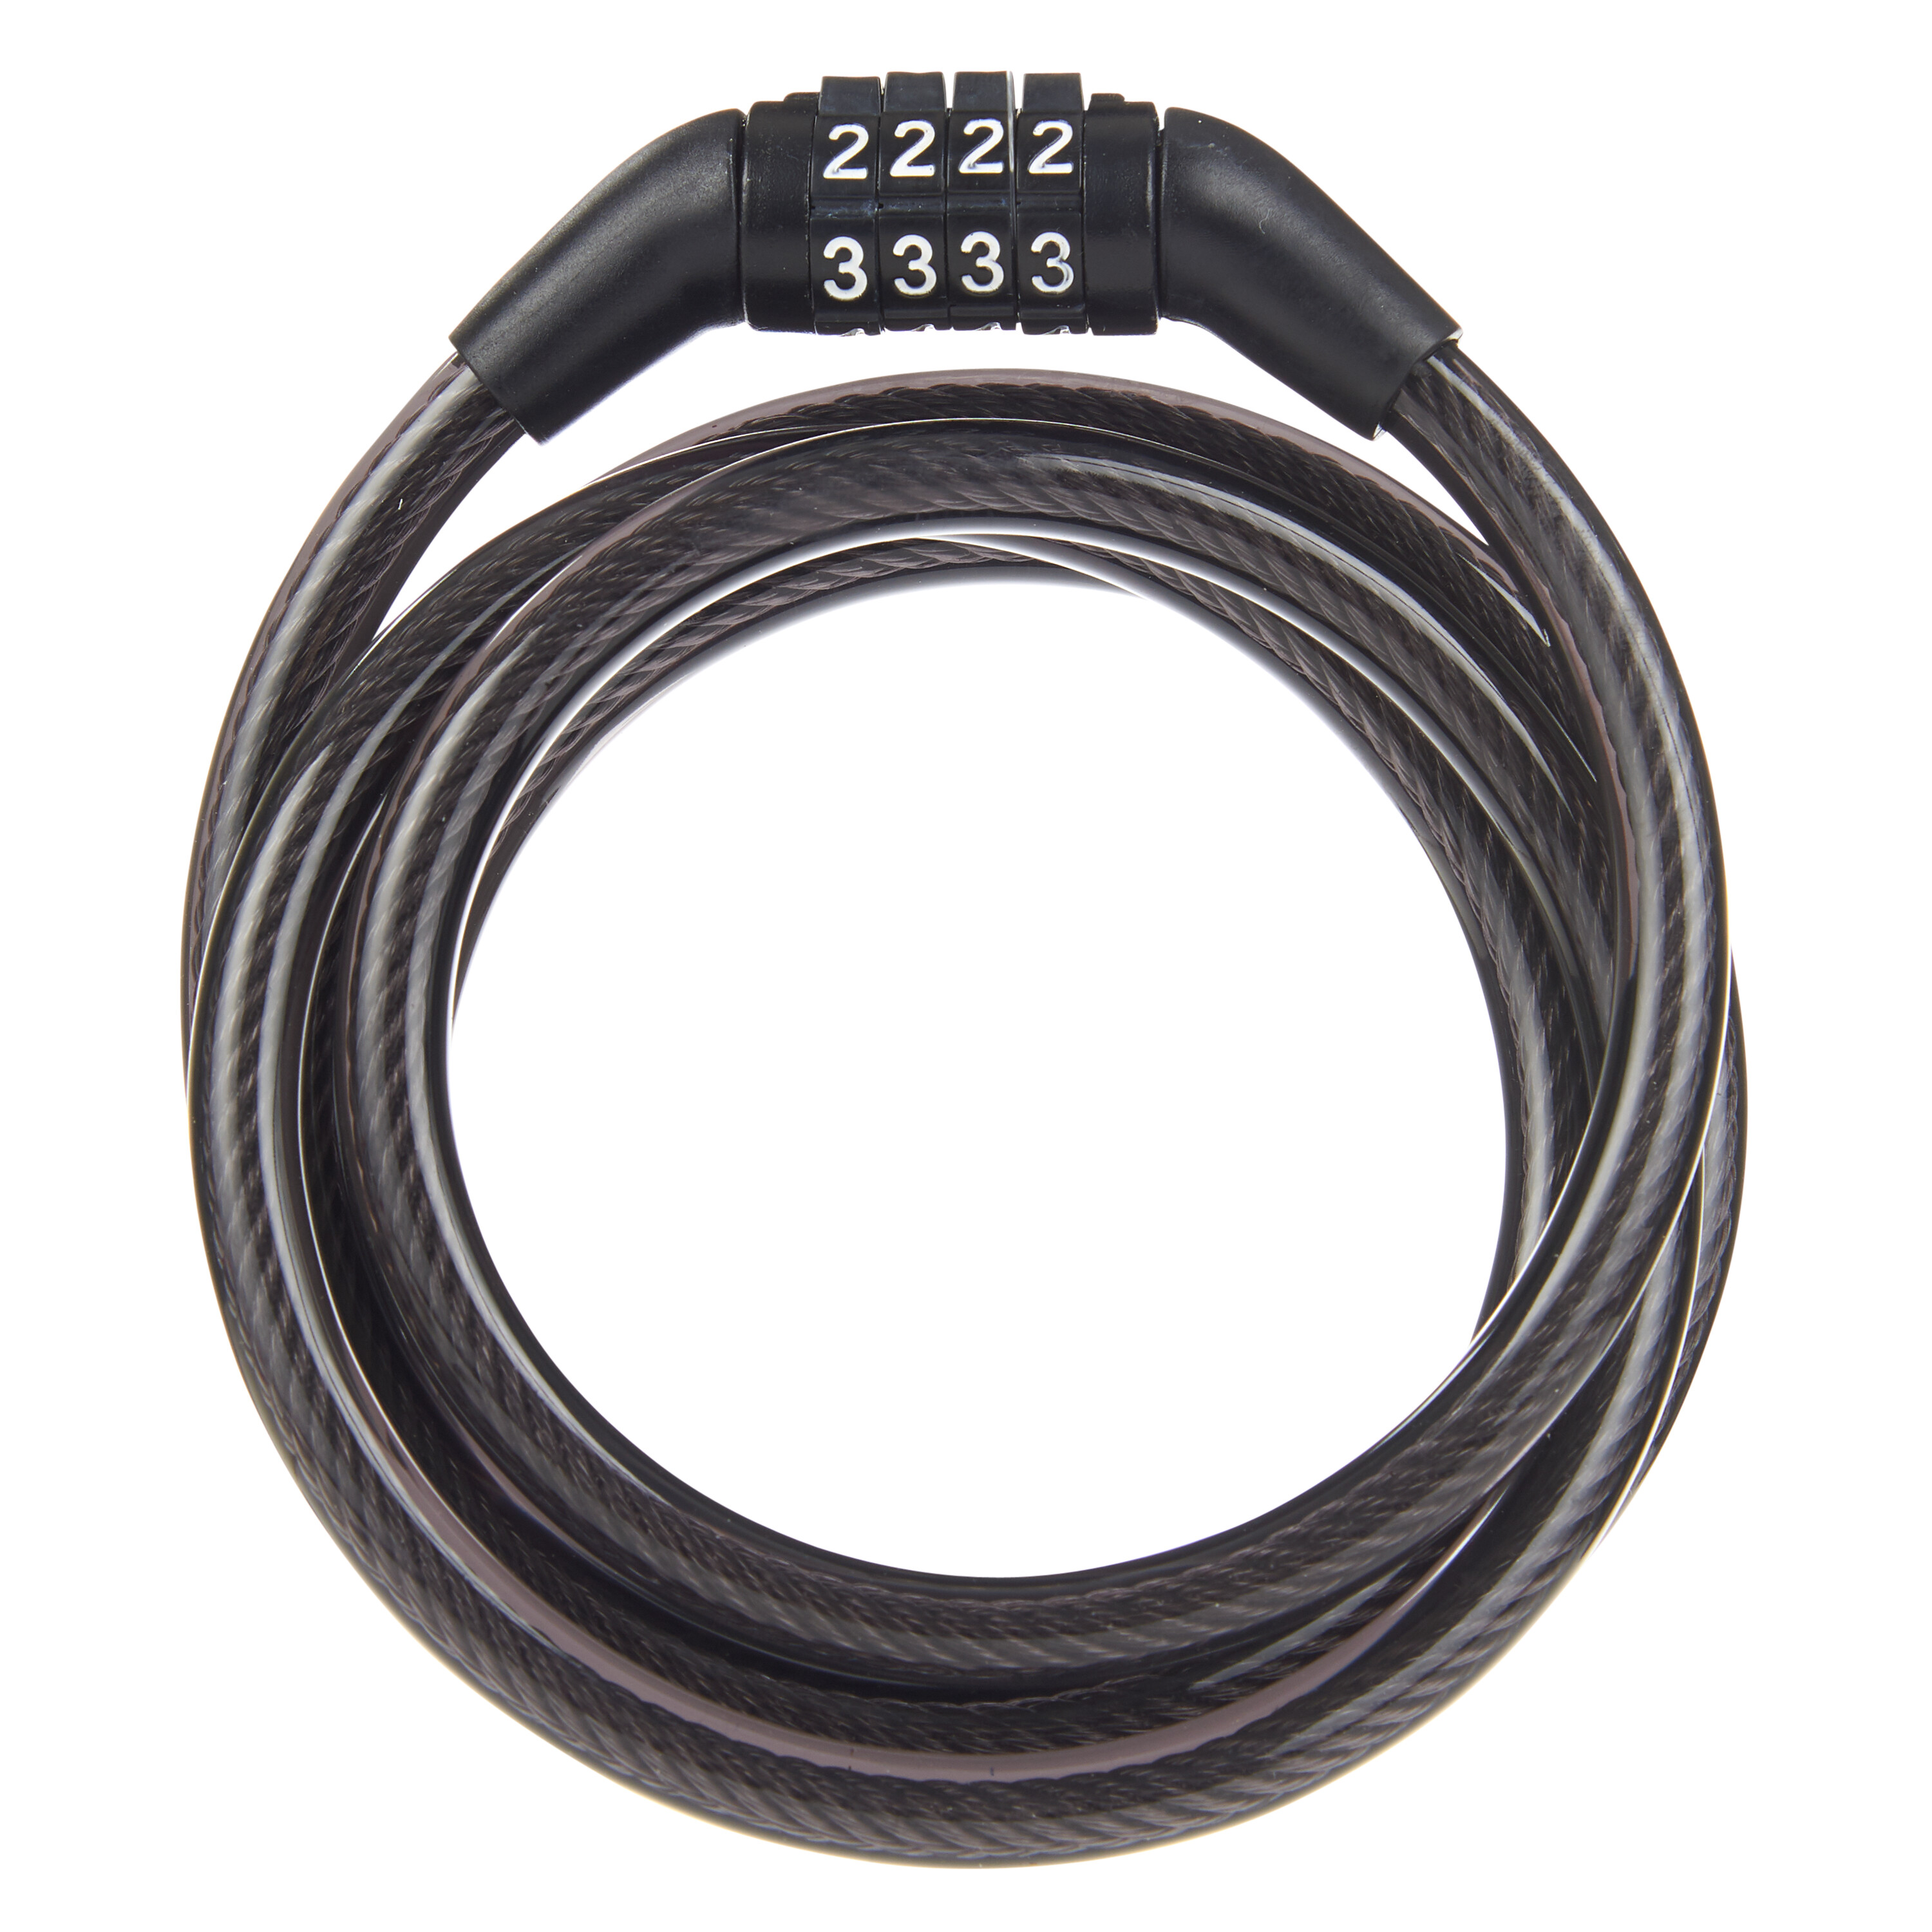 5/16” x 5' Vinyl Covered Flexible Steel Combination Cable